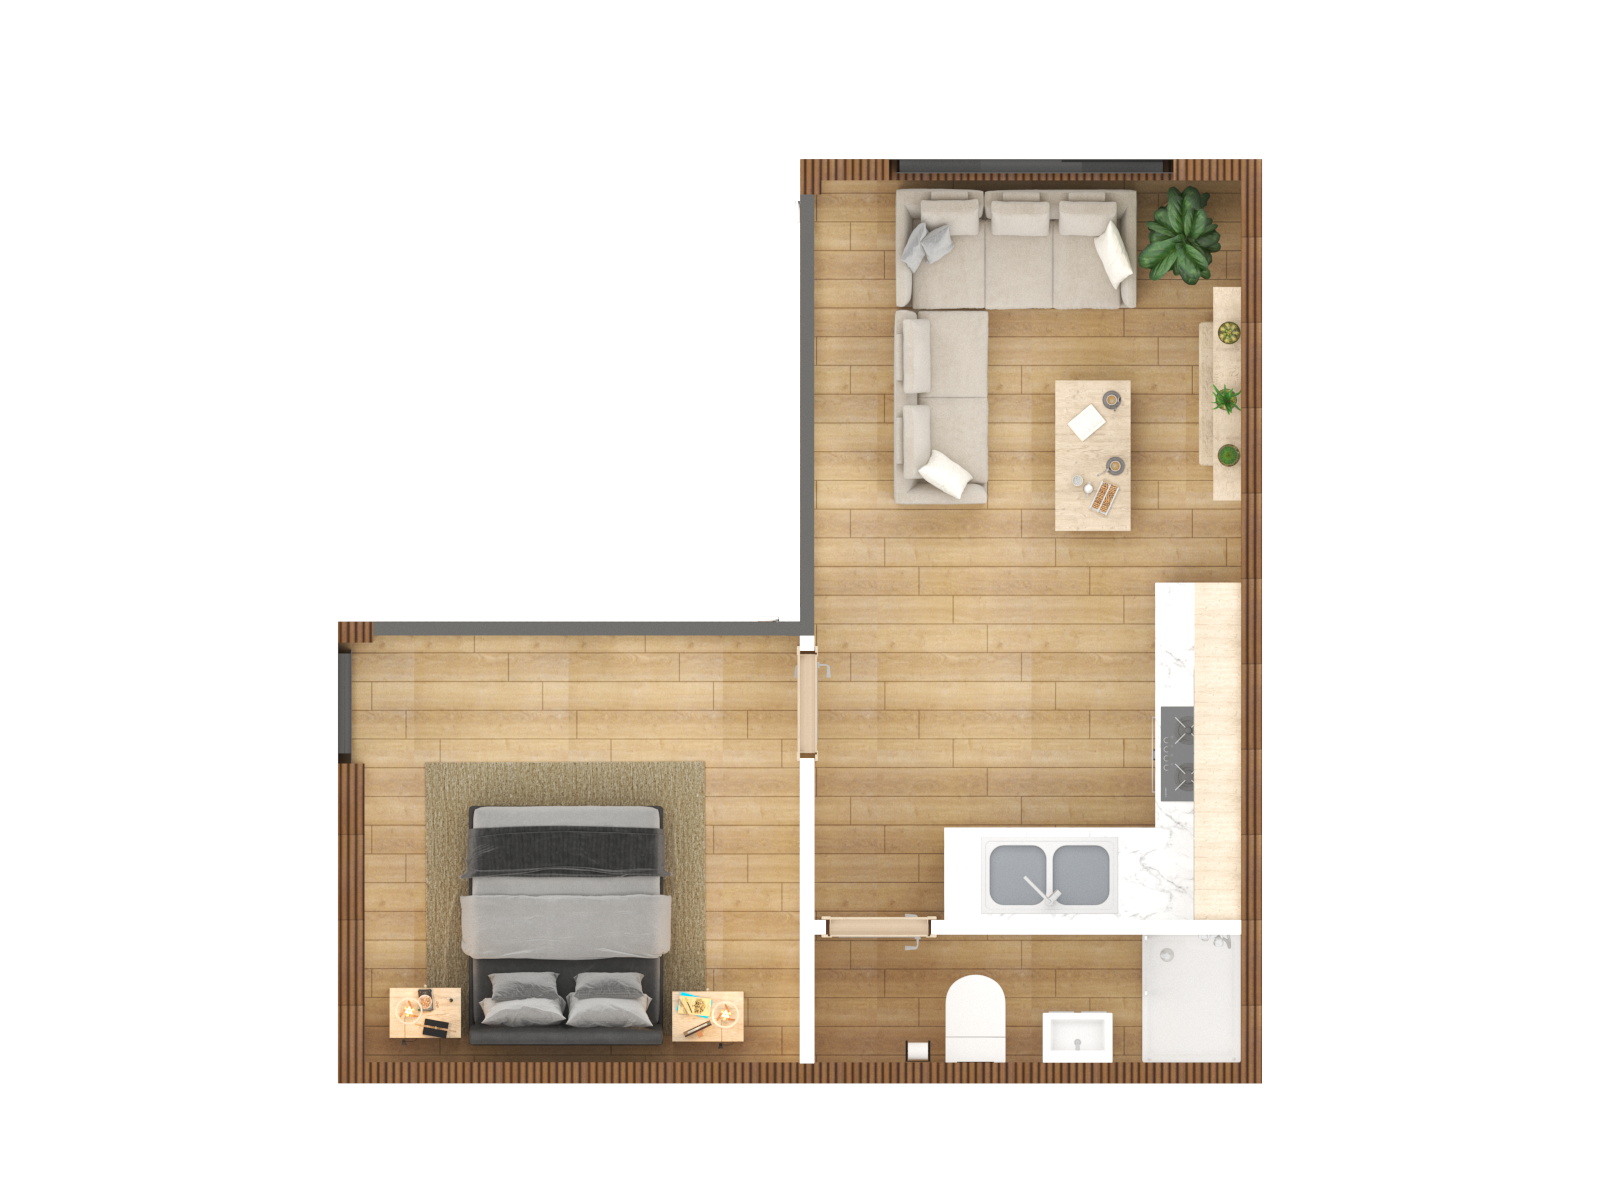 an l shaped garden room floor plan shows a bedroom a living room and a bathroom